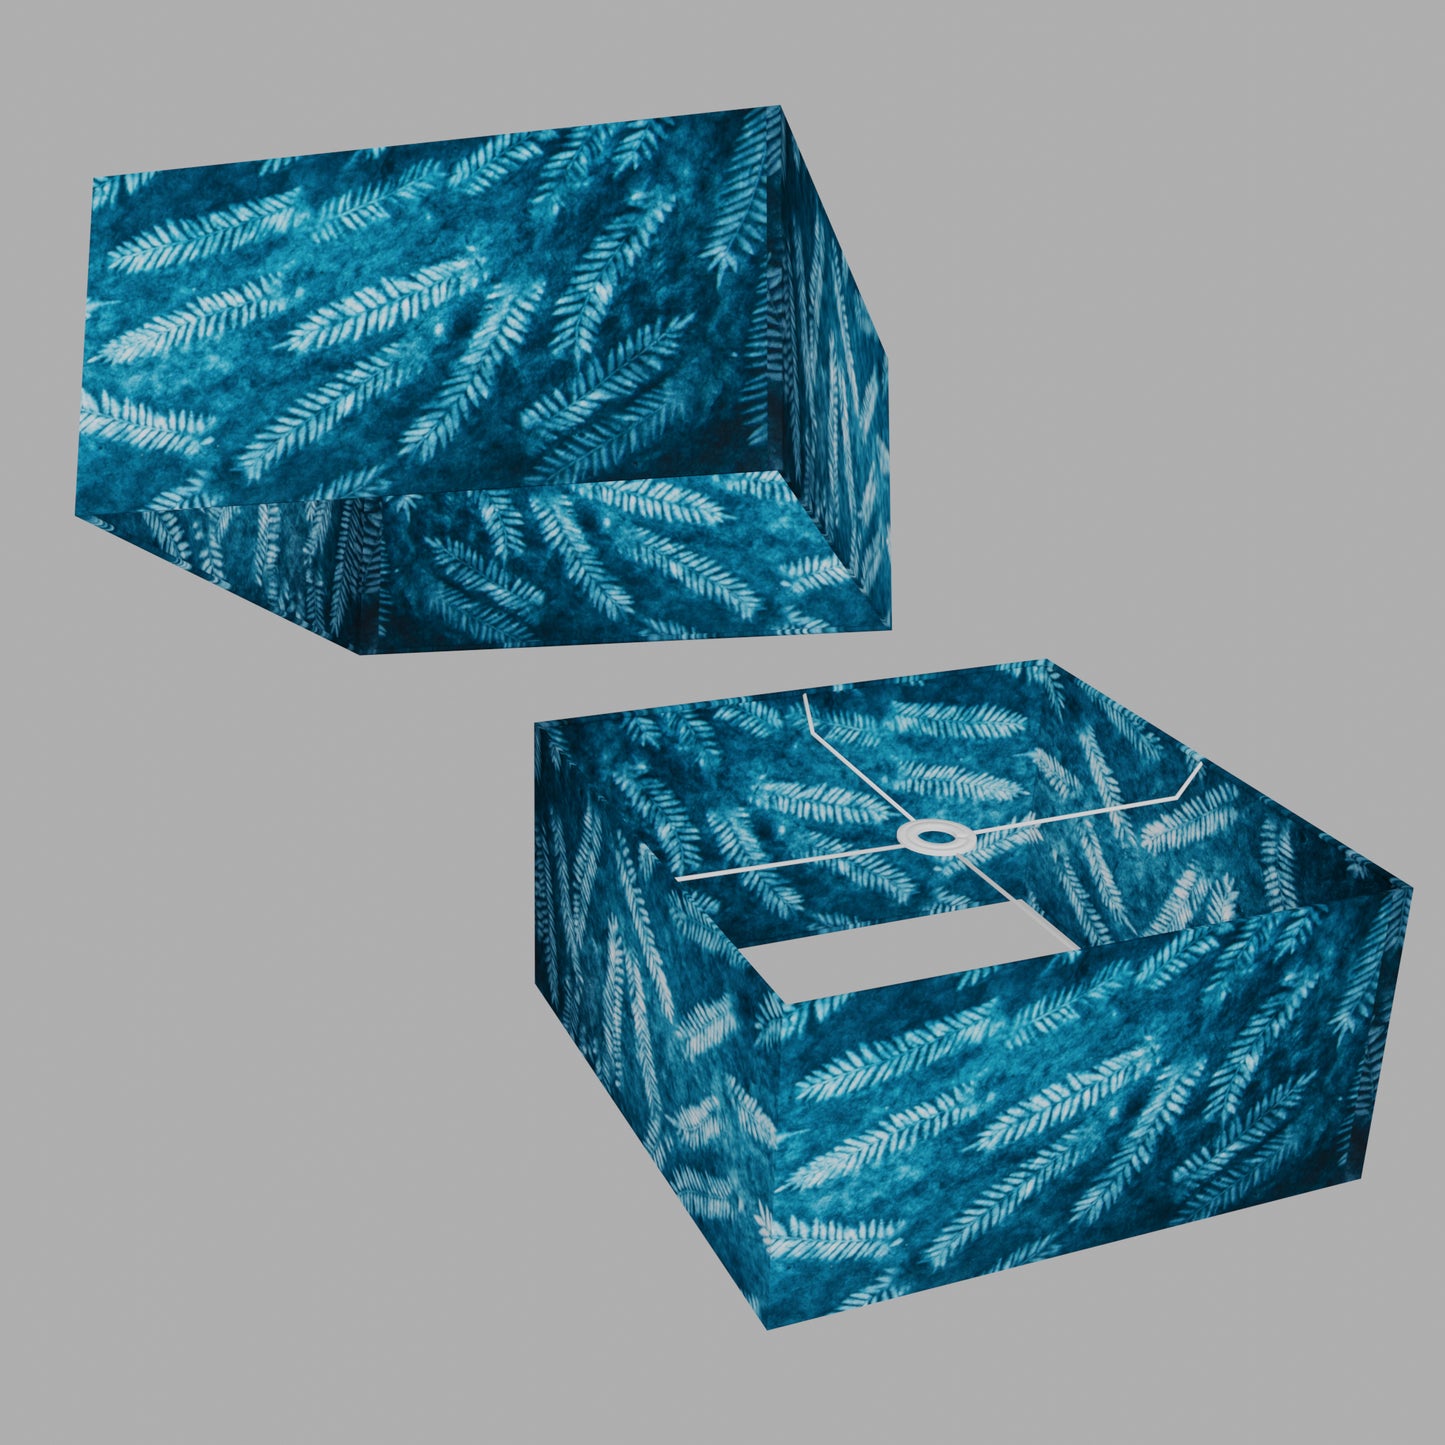 Square Lamp Shade - B106 ~ Resistance Dyed Teal Fern, 40cm(w) x 20cm(h) x 40cm(d)